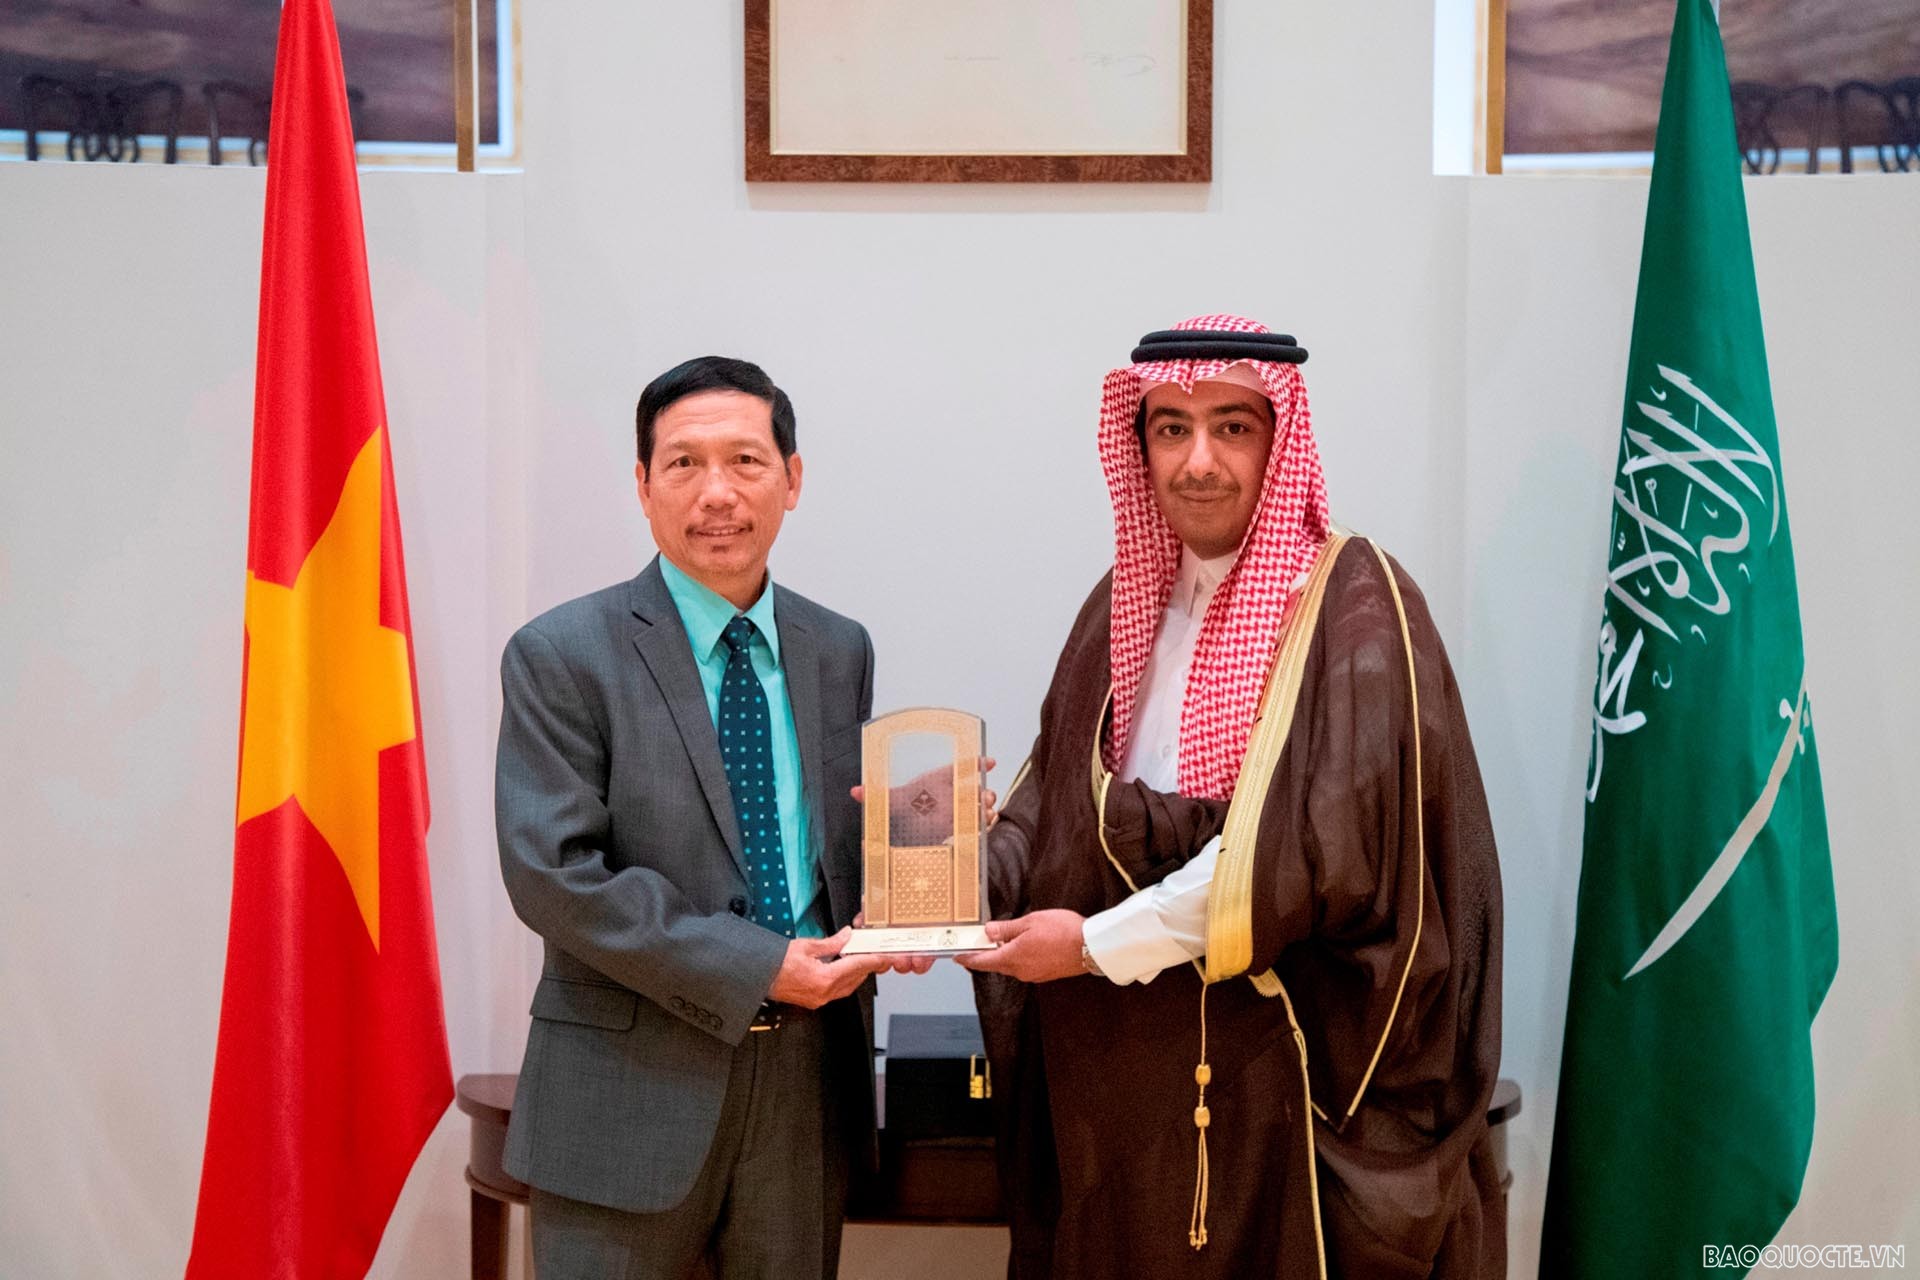 Leaders of the Ministry of Foreign Affairs of Saudi Arabia gave gifts and took souvenir photos with the Vietnamese Ambassador.